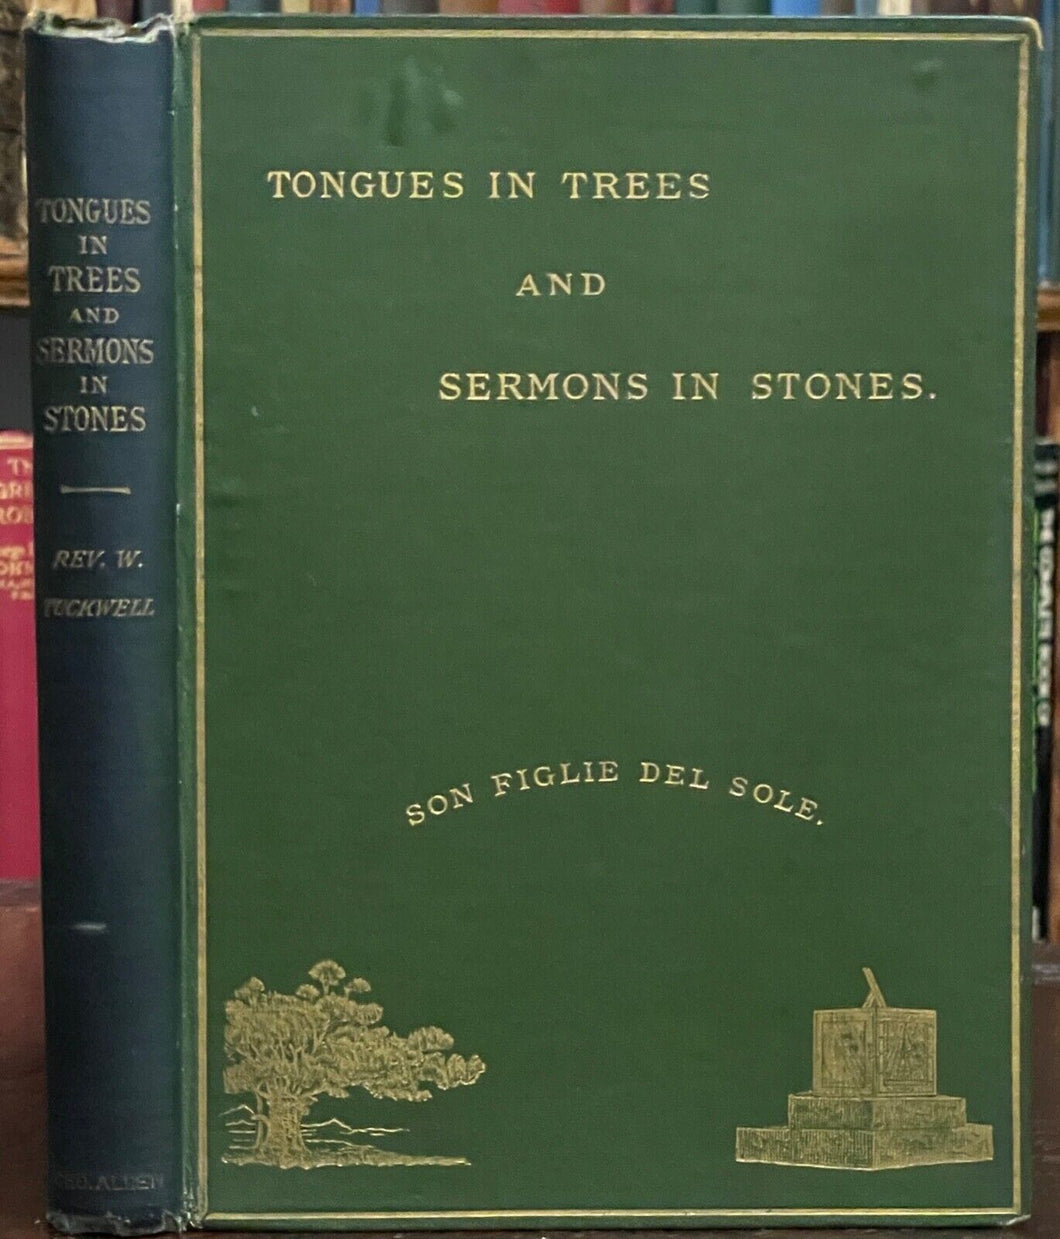 TONGUES IN TREES - Tuckwell, 1st 1891 - PLANT LORE FOLKLORE TREE NATURE WORSHIP